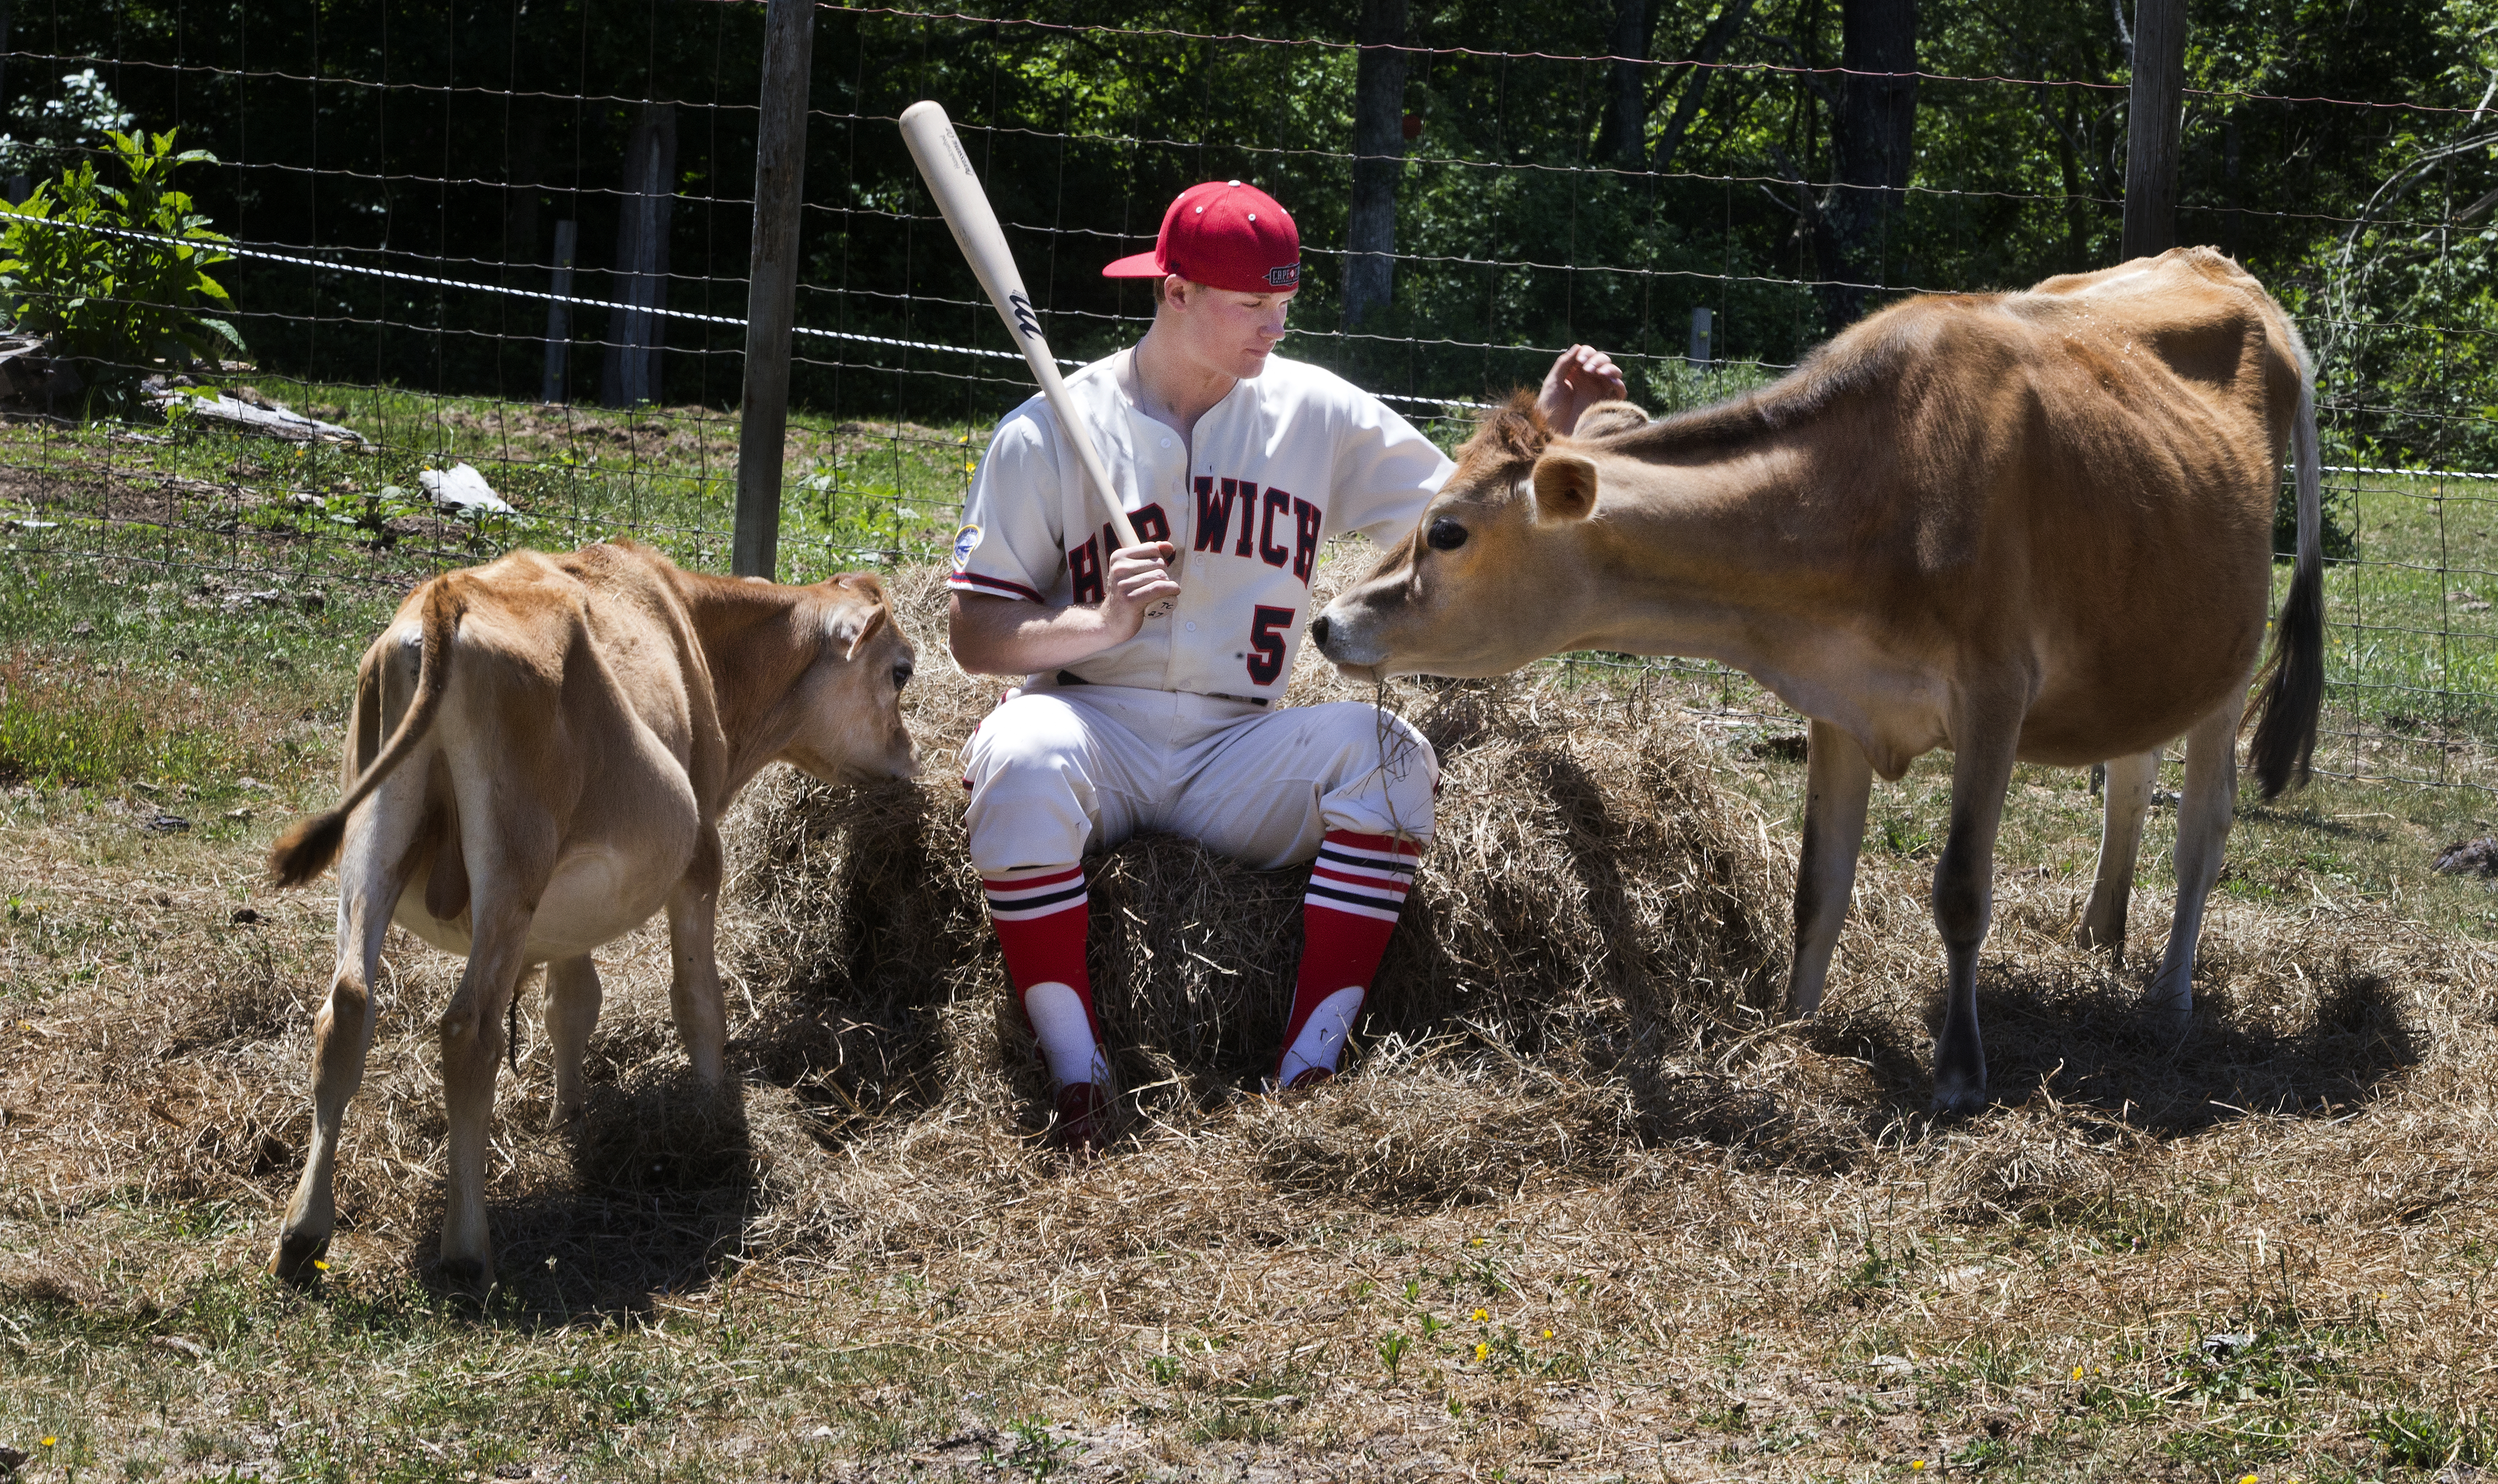 Ian Happ is a possible Cubs No. 1 pick. The cows aren't included